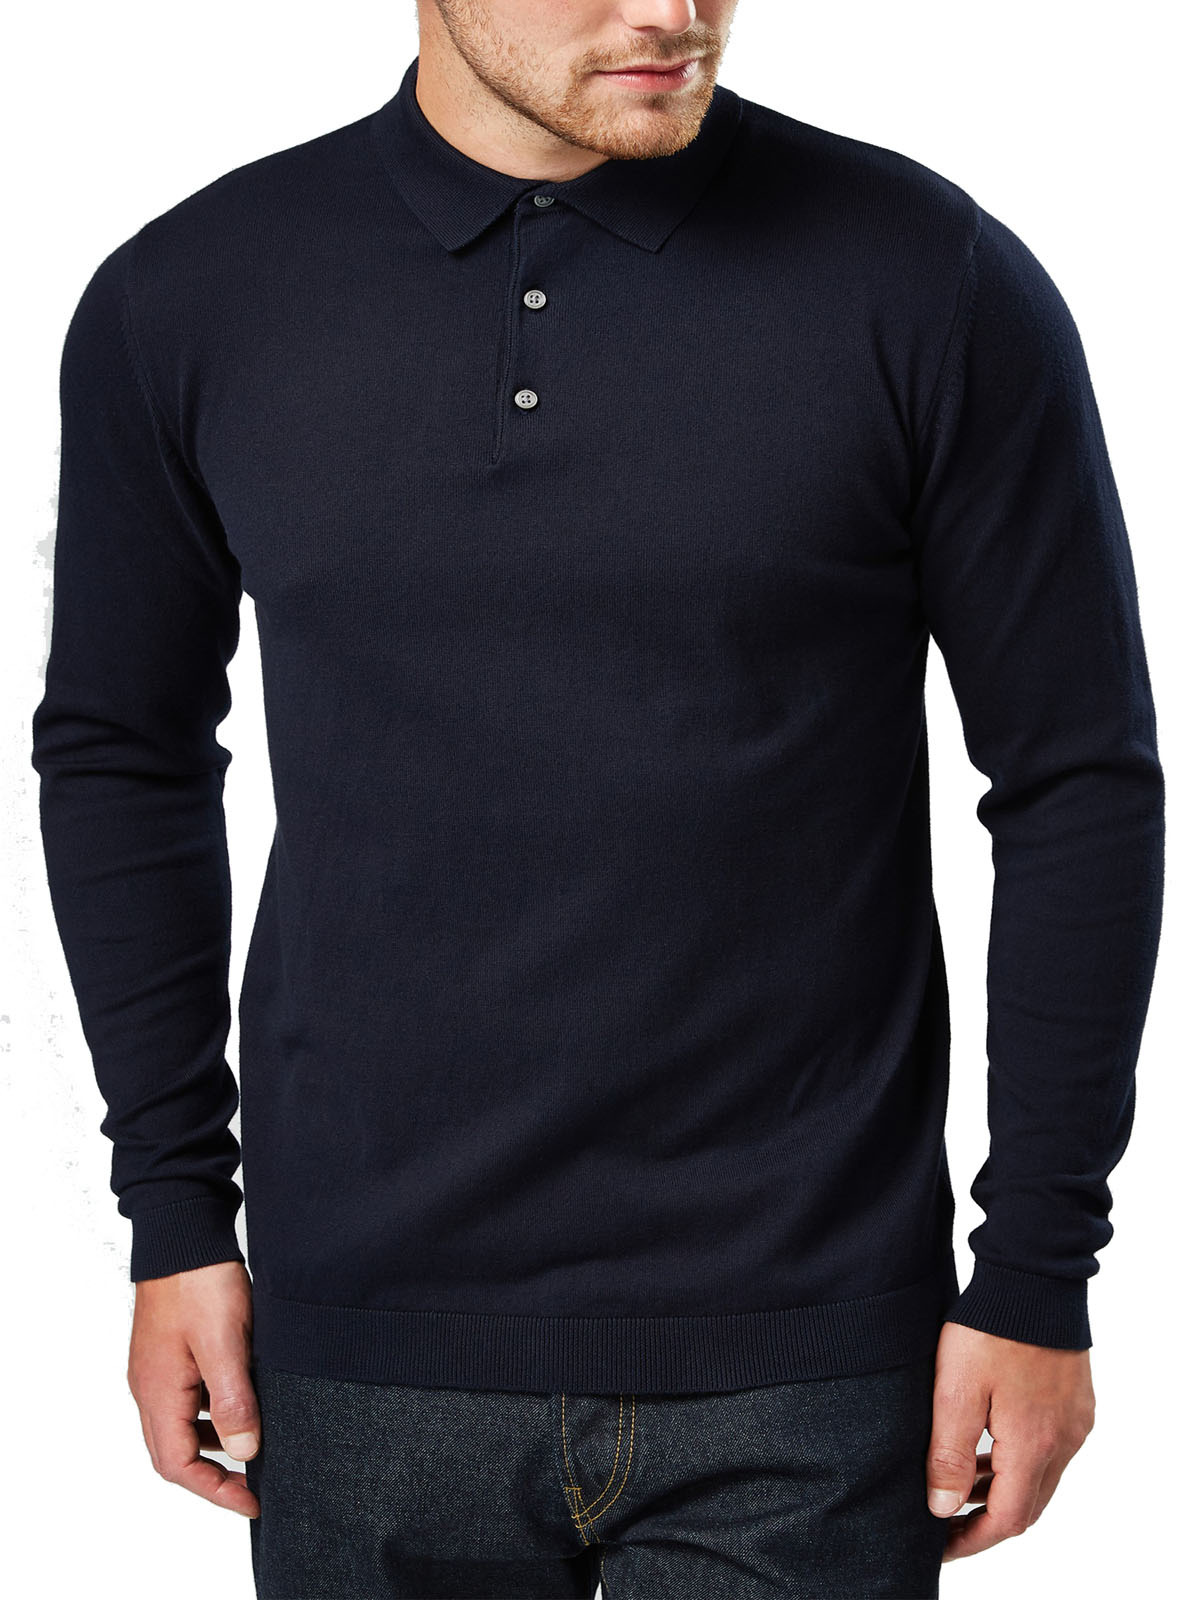 N3XT NAVY Mens Cotton Rich Long Sleeve Polo Shirt - Size Small to XXLarge